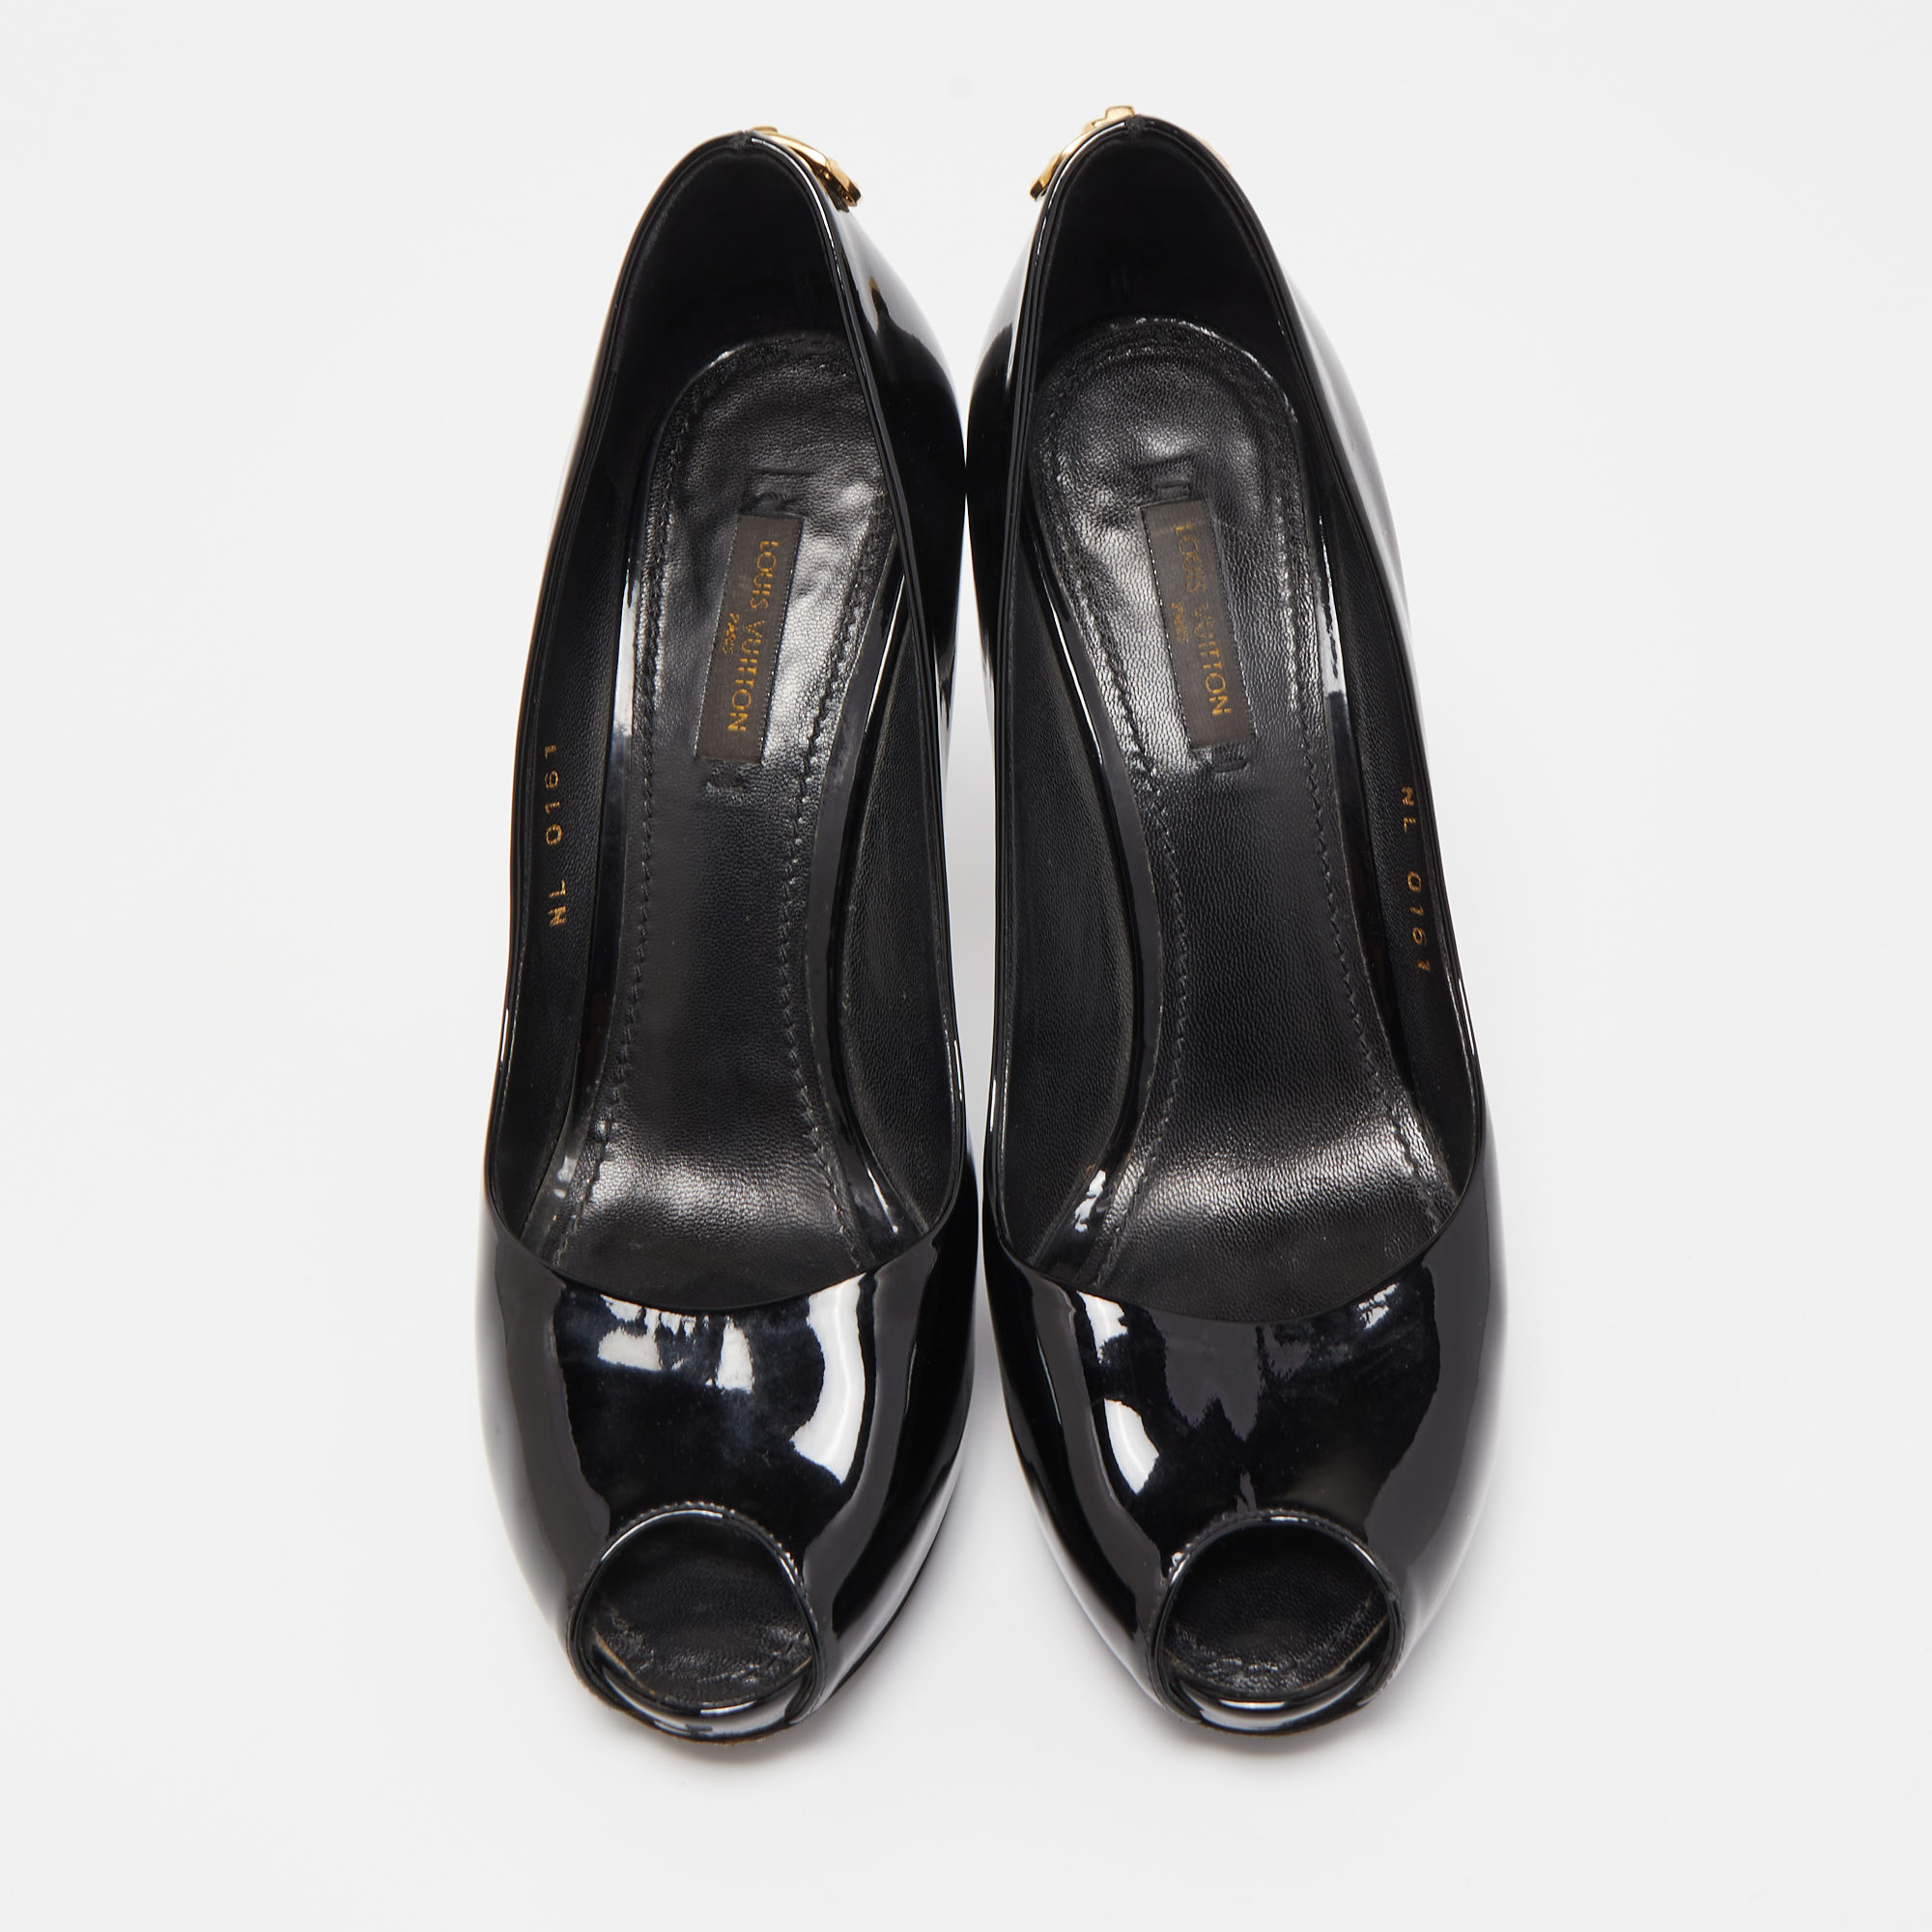 Louis Vuitton Black Patent Leather Oh Really! Pumps Size 37